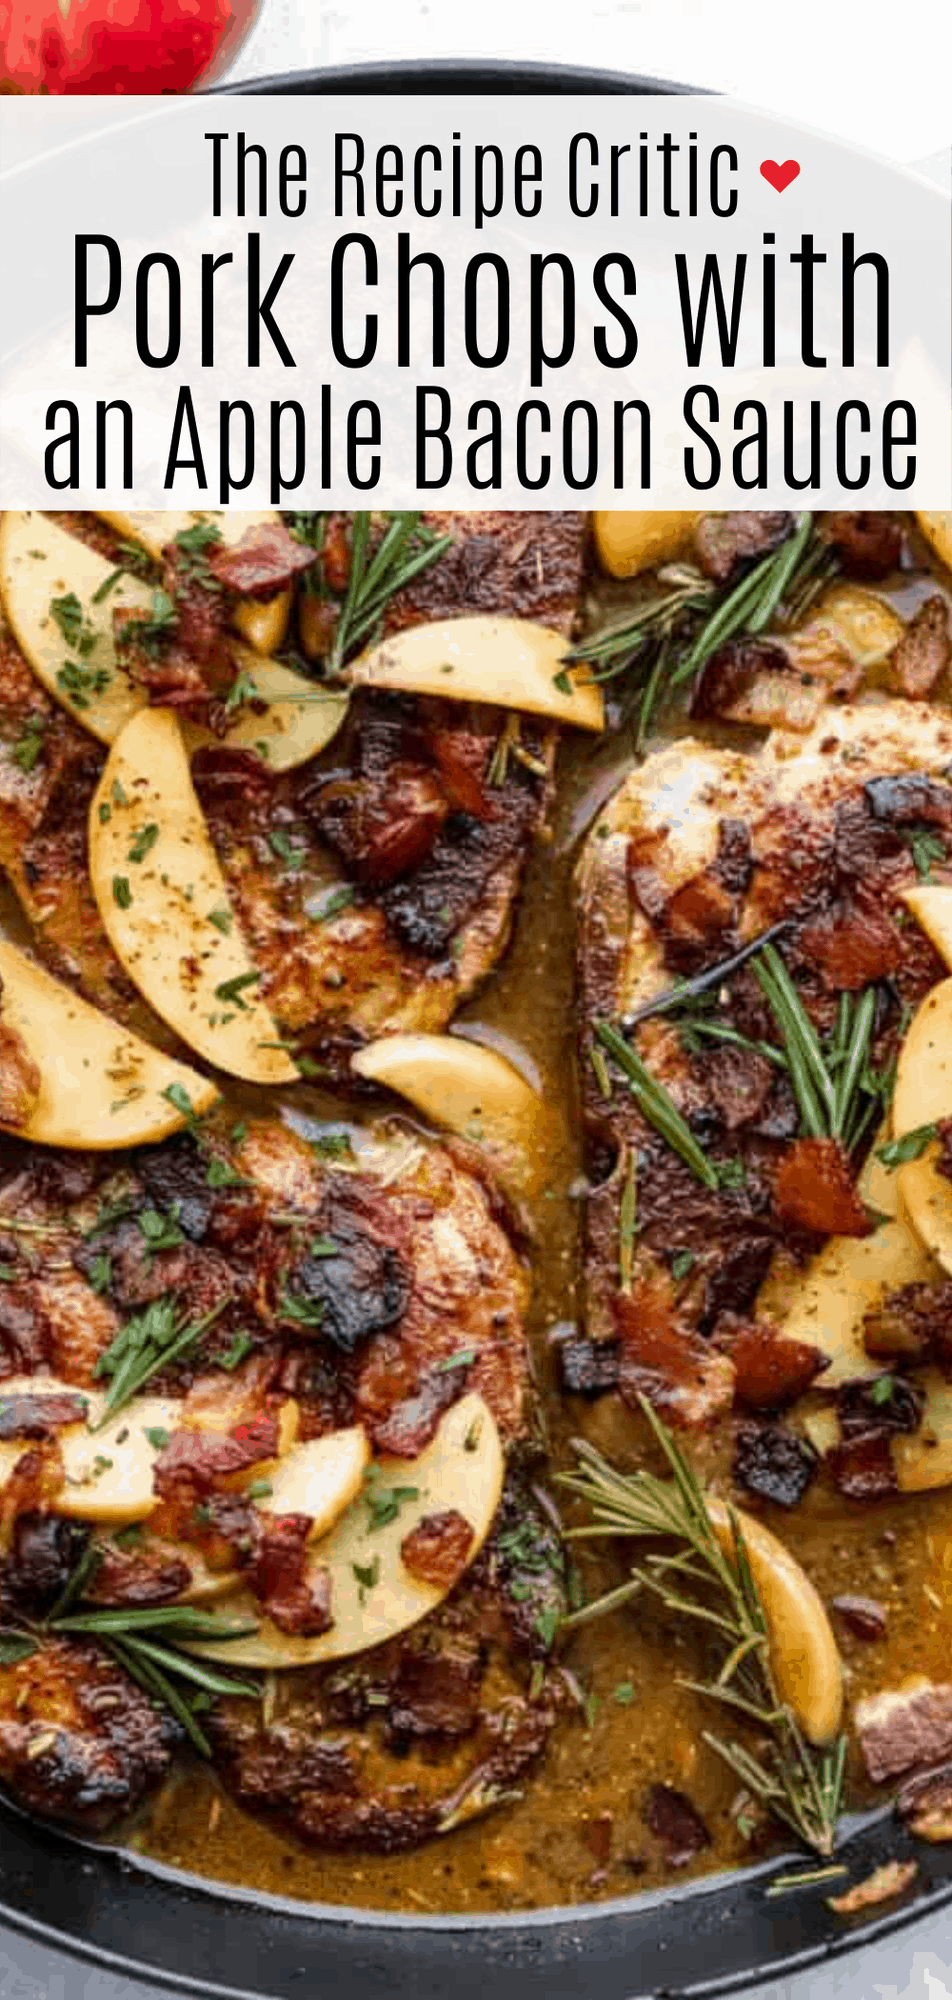 Pork Chops with Apples in an Apple Bacon Sauce | The Recipe Critic